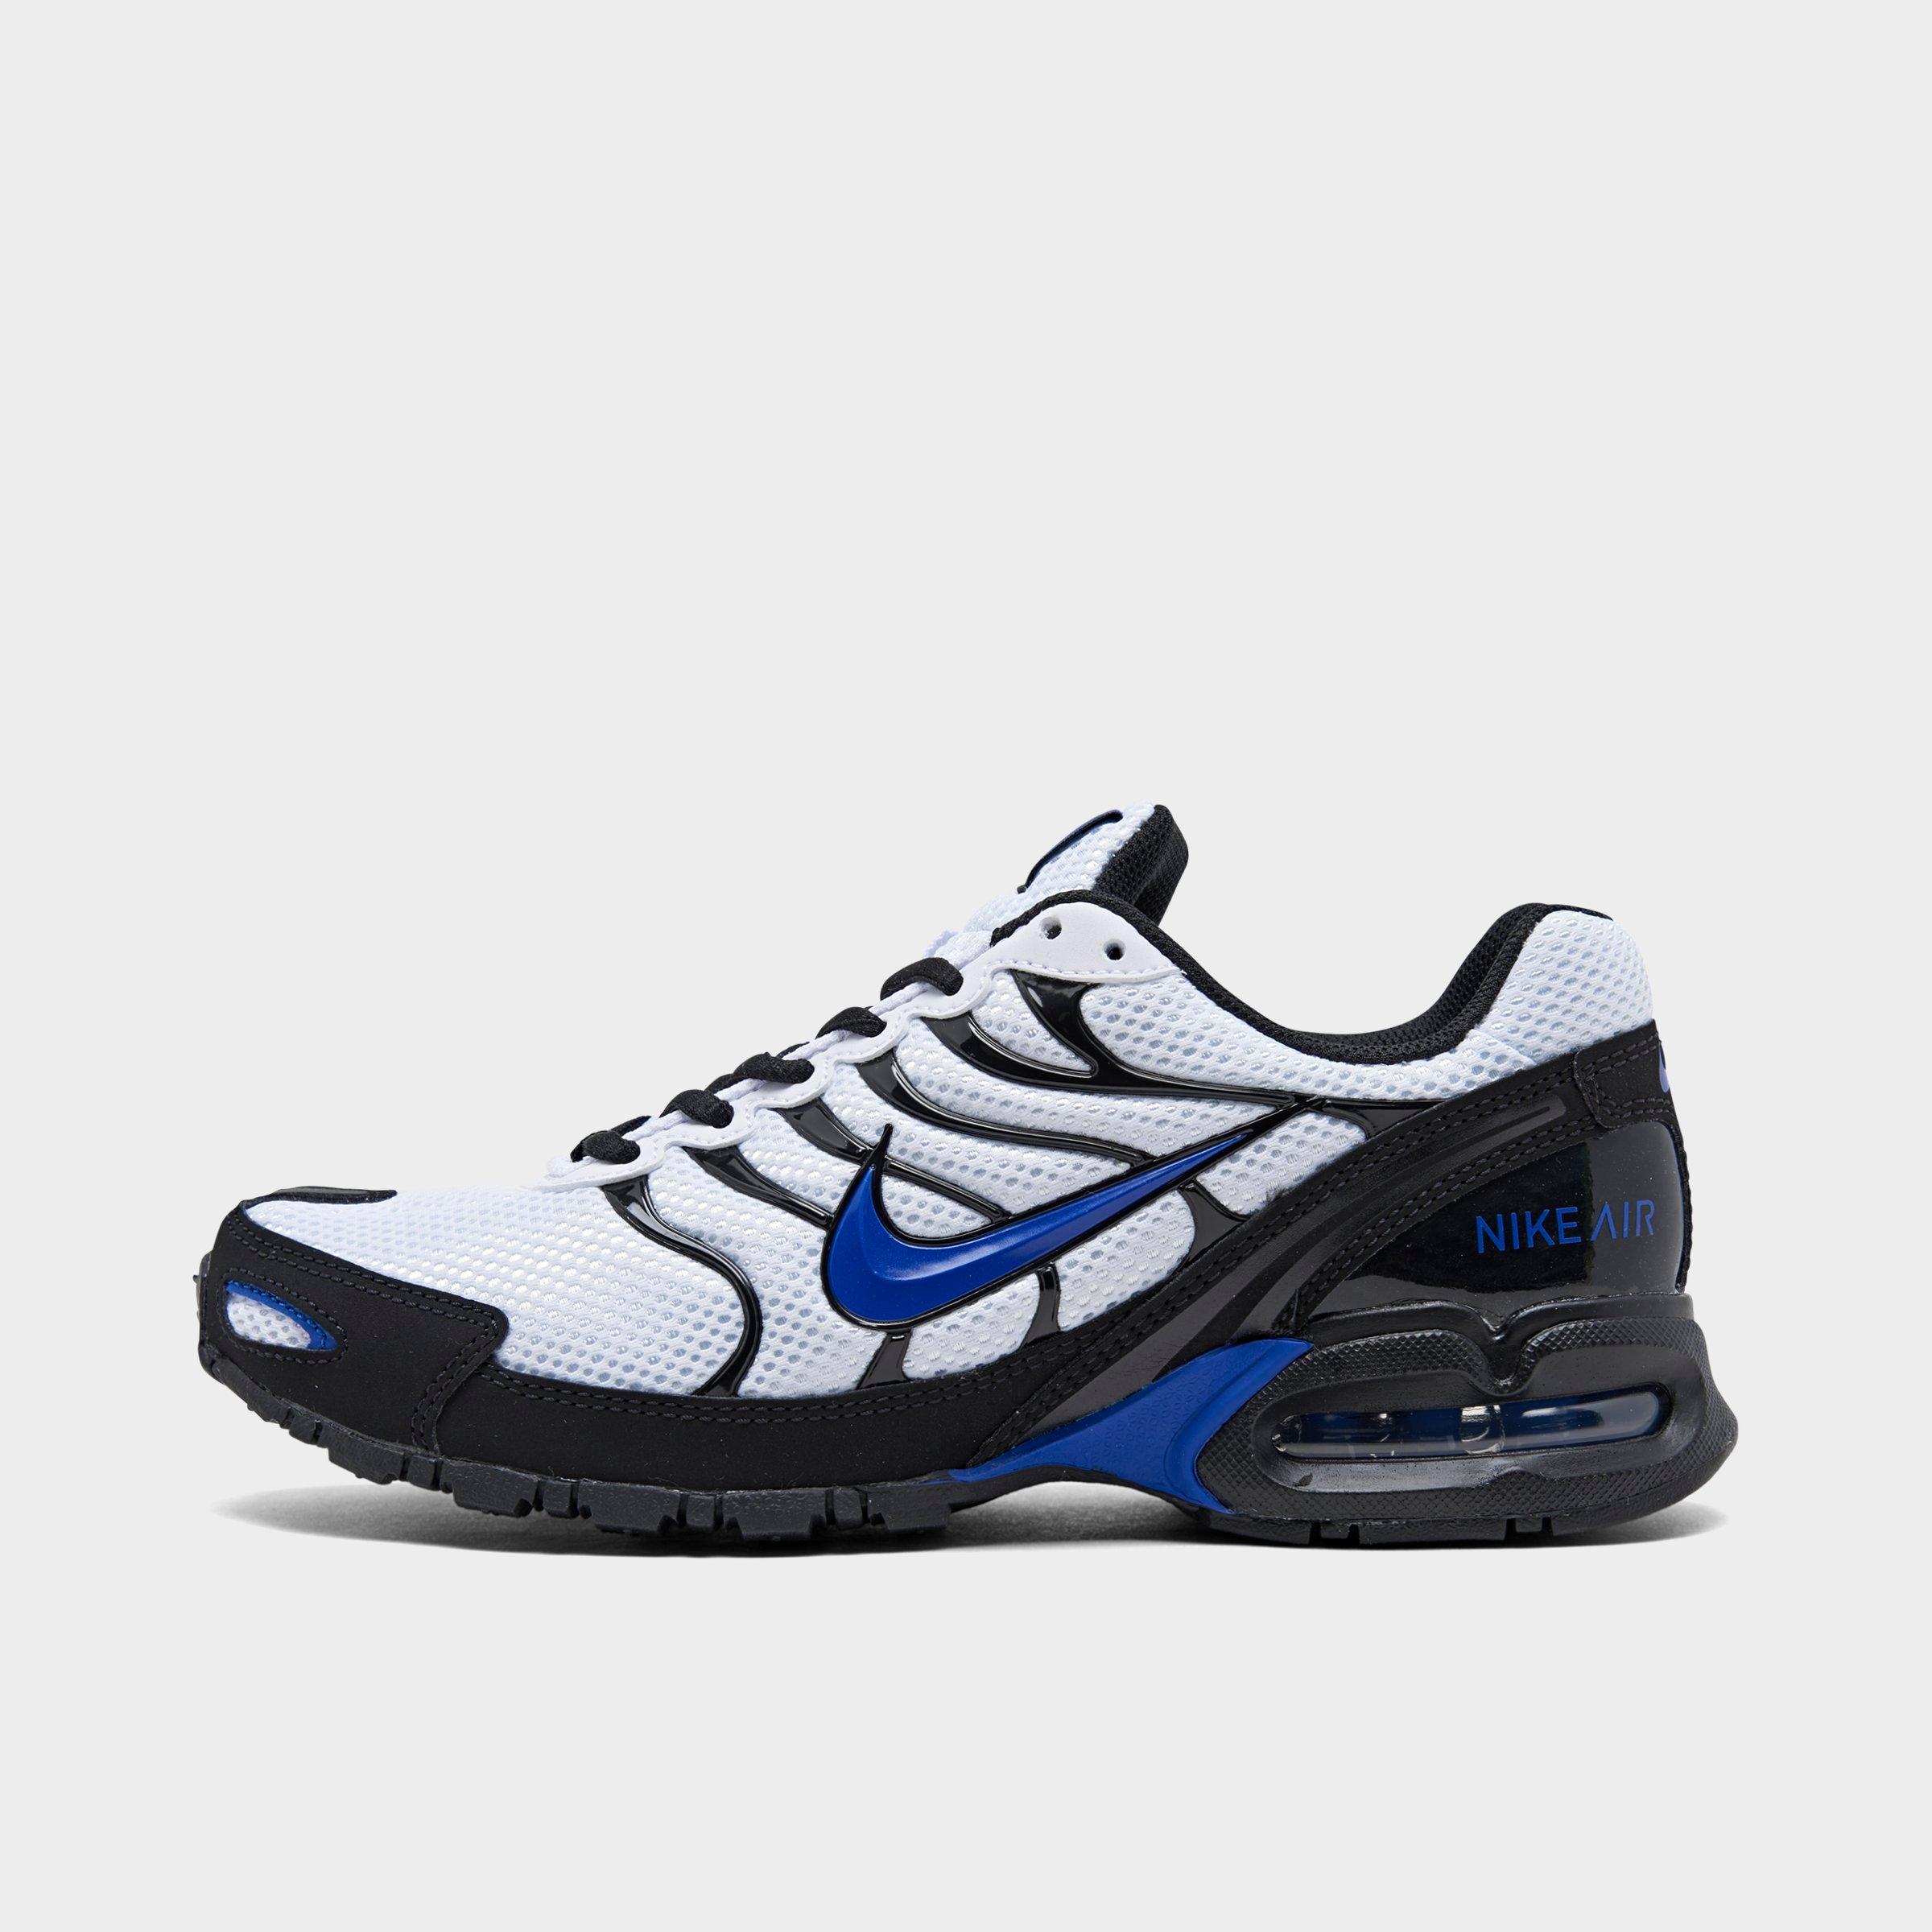 Nike Air Max Torch 4 Running Shoes 